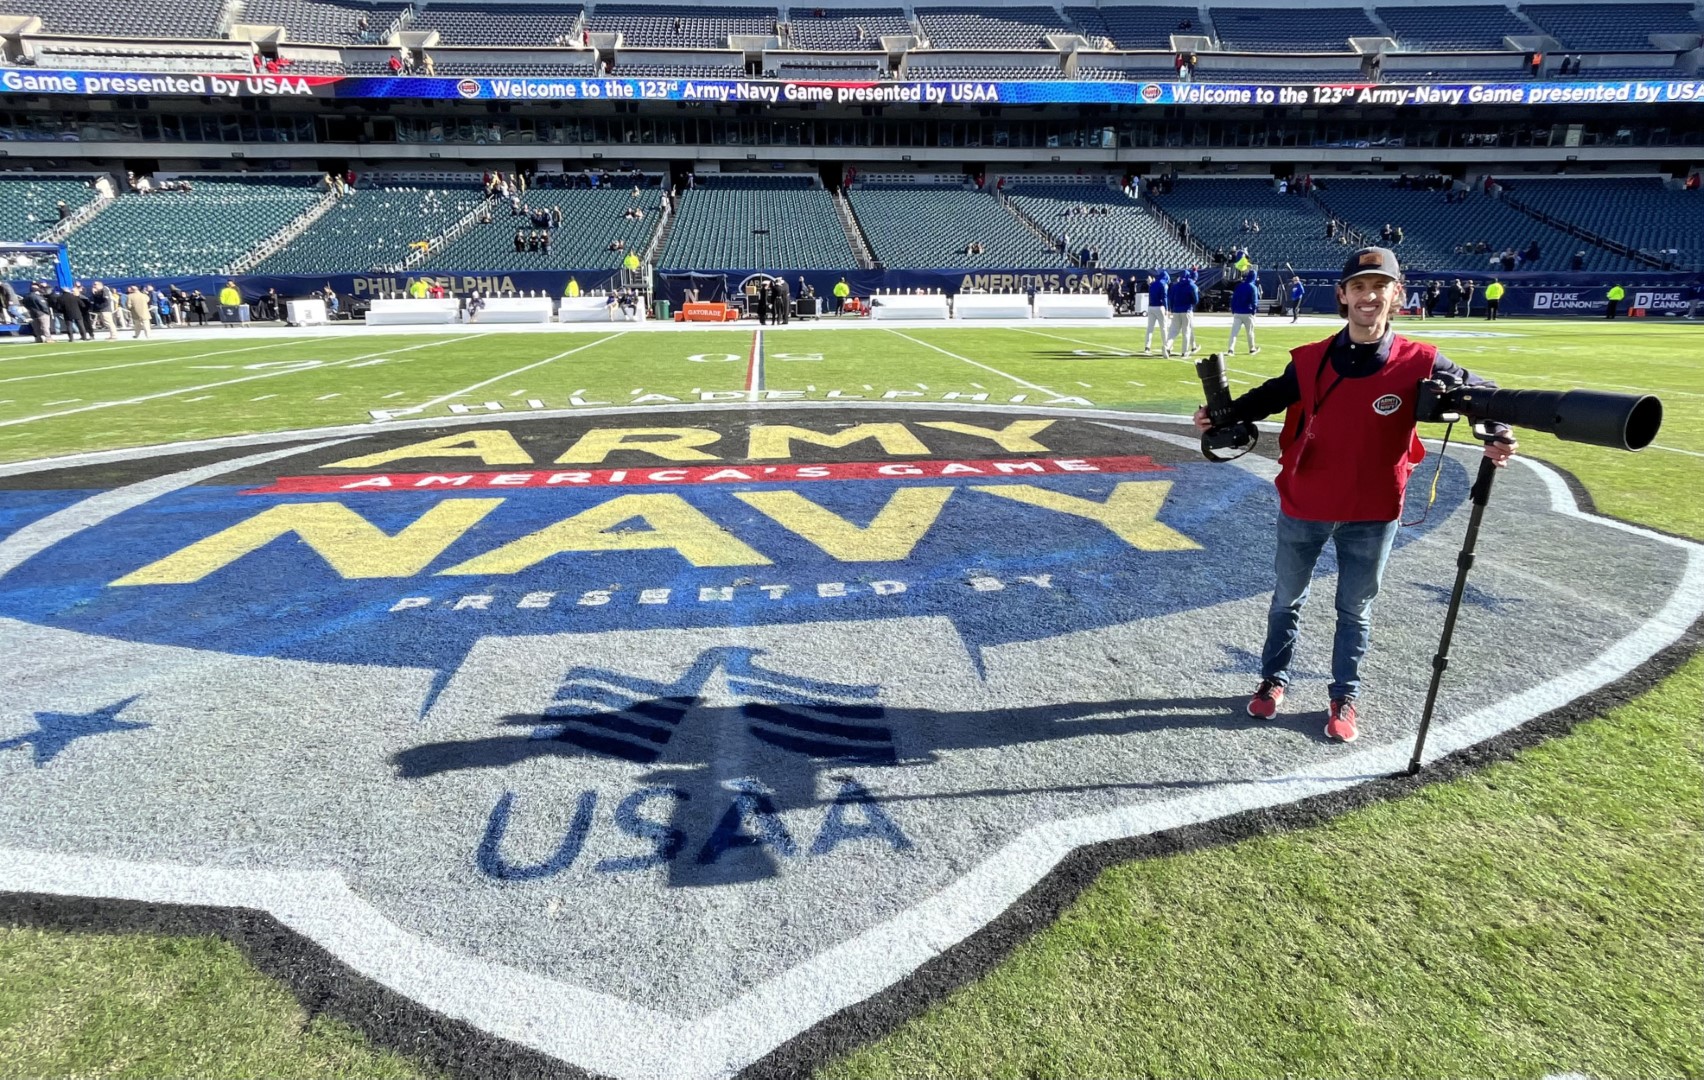 Justin Cohen at 123rd Army-Navy Game in Philadelphia